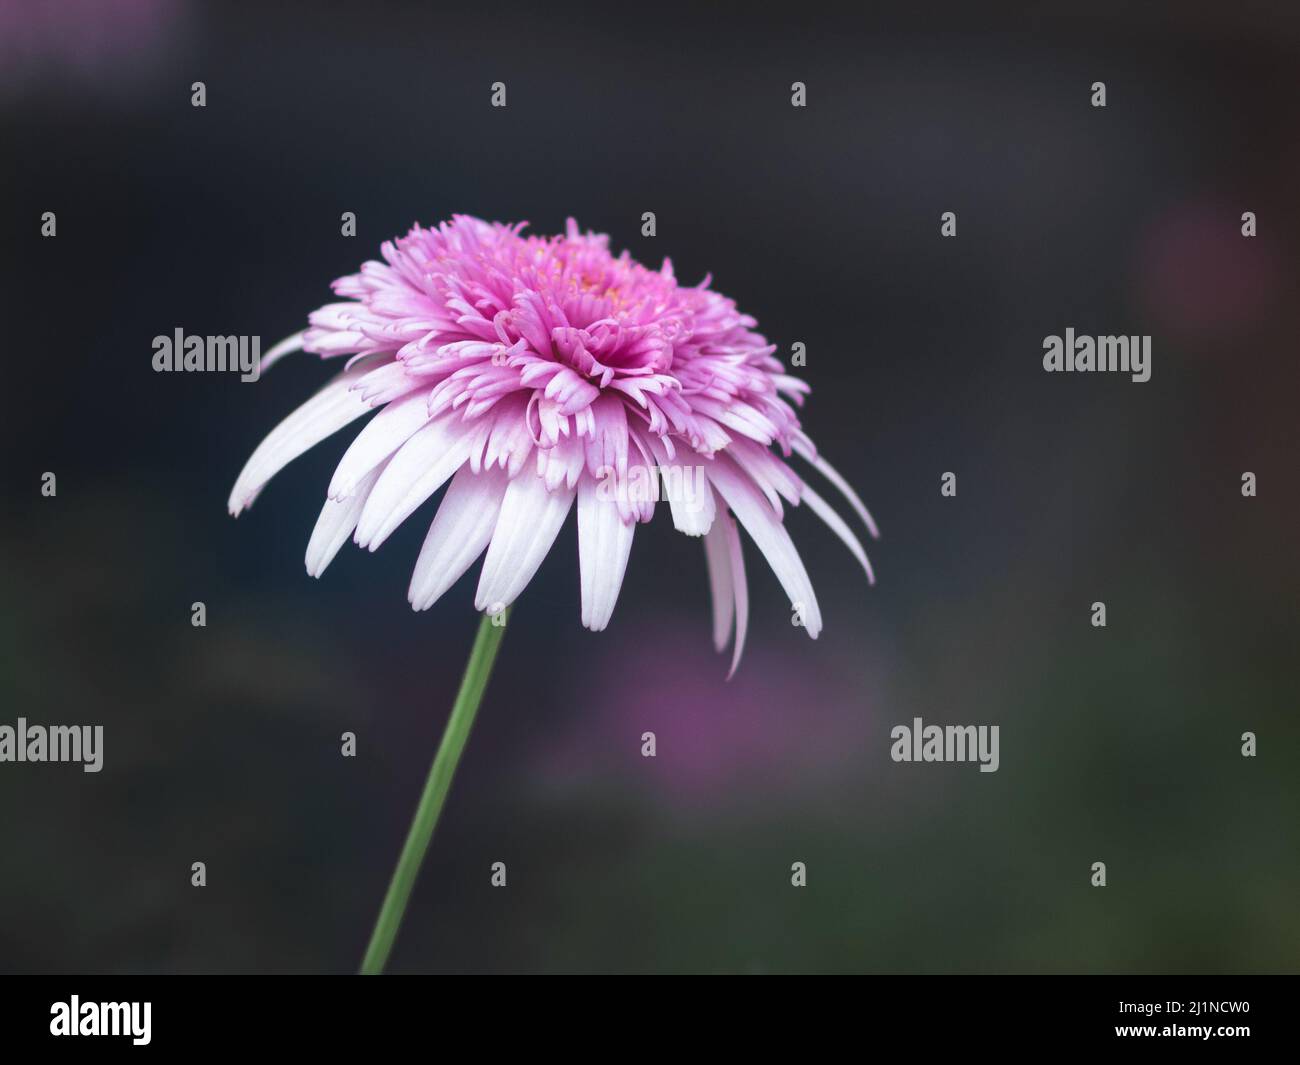 A vibrant pink Chinese aster flower with long hanging petals blooming against a blurred dark background. Flower photography with empty space for text Stock Photo